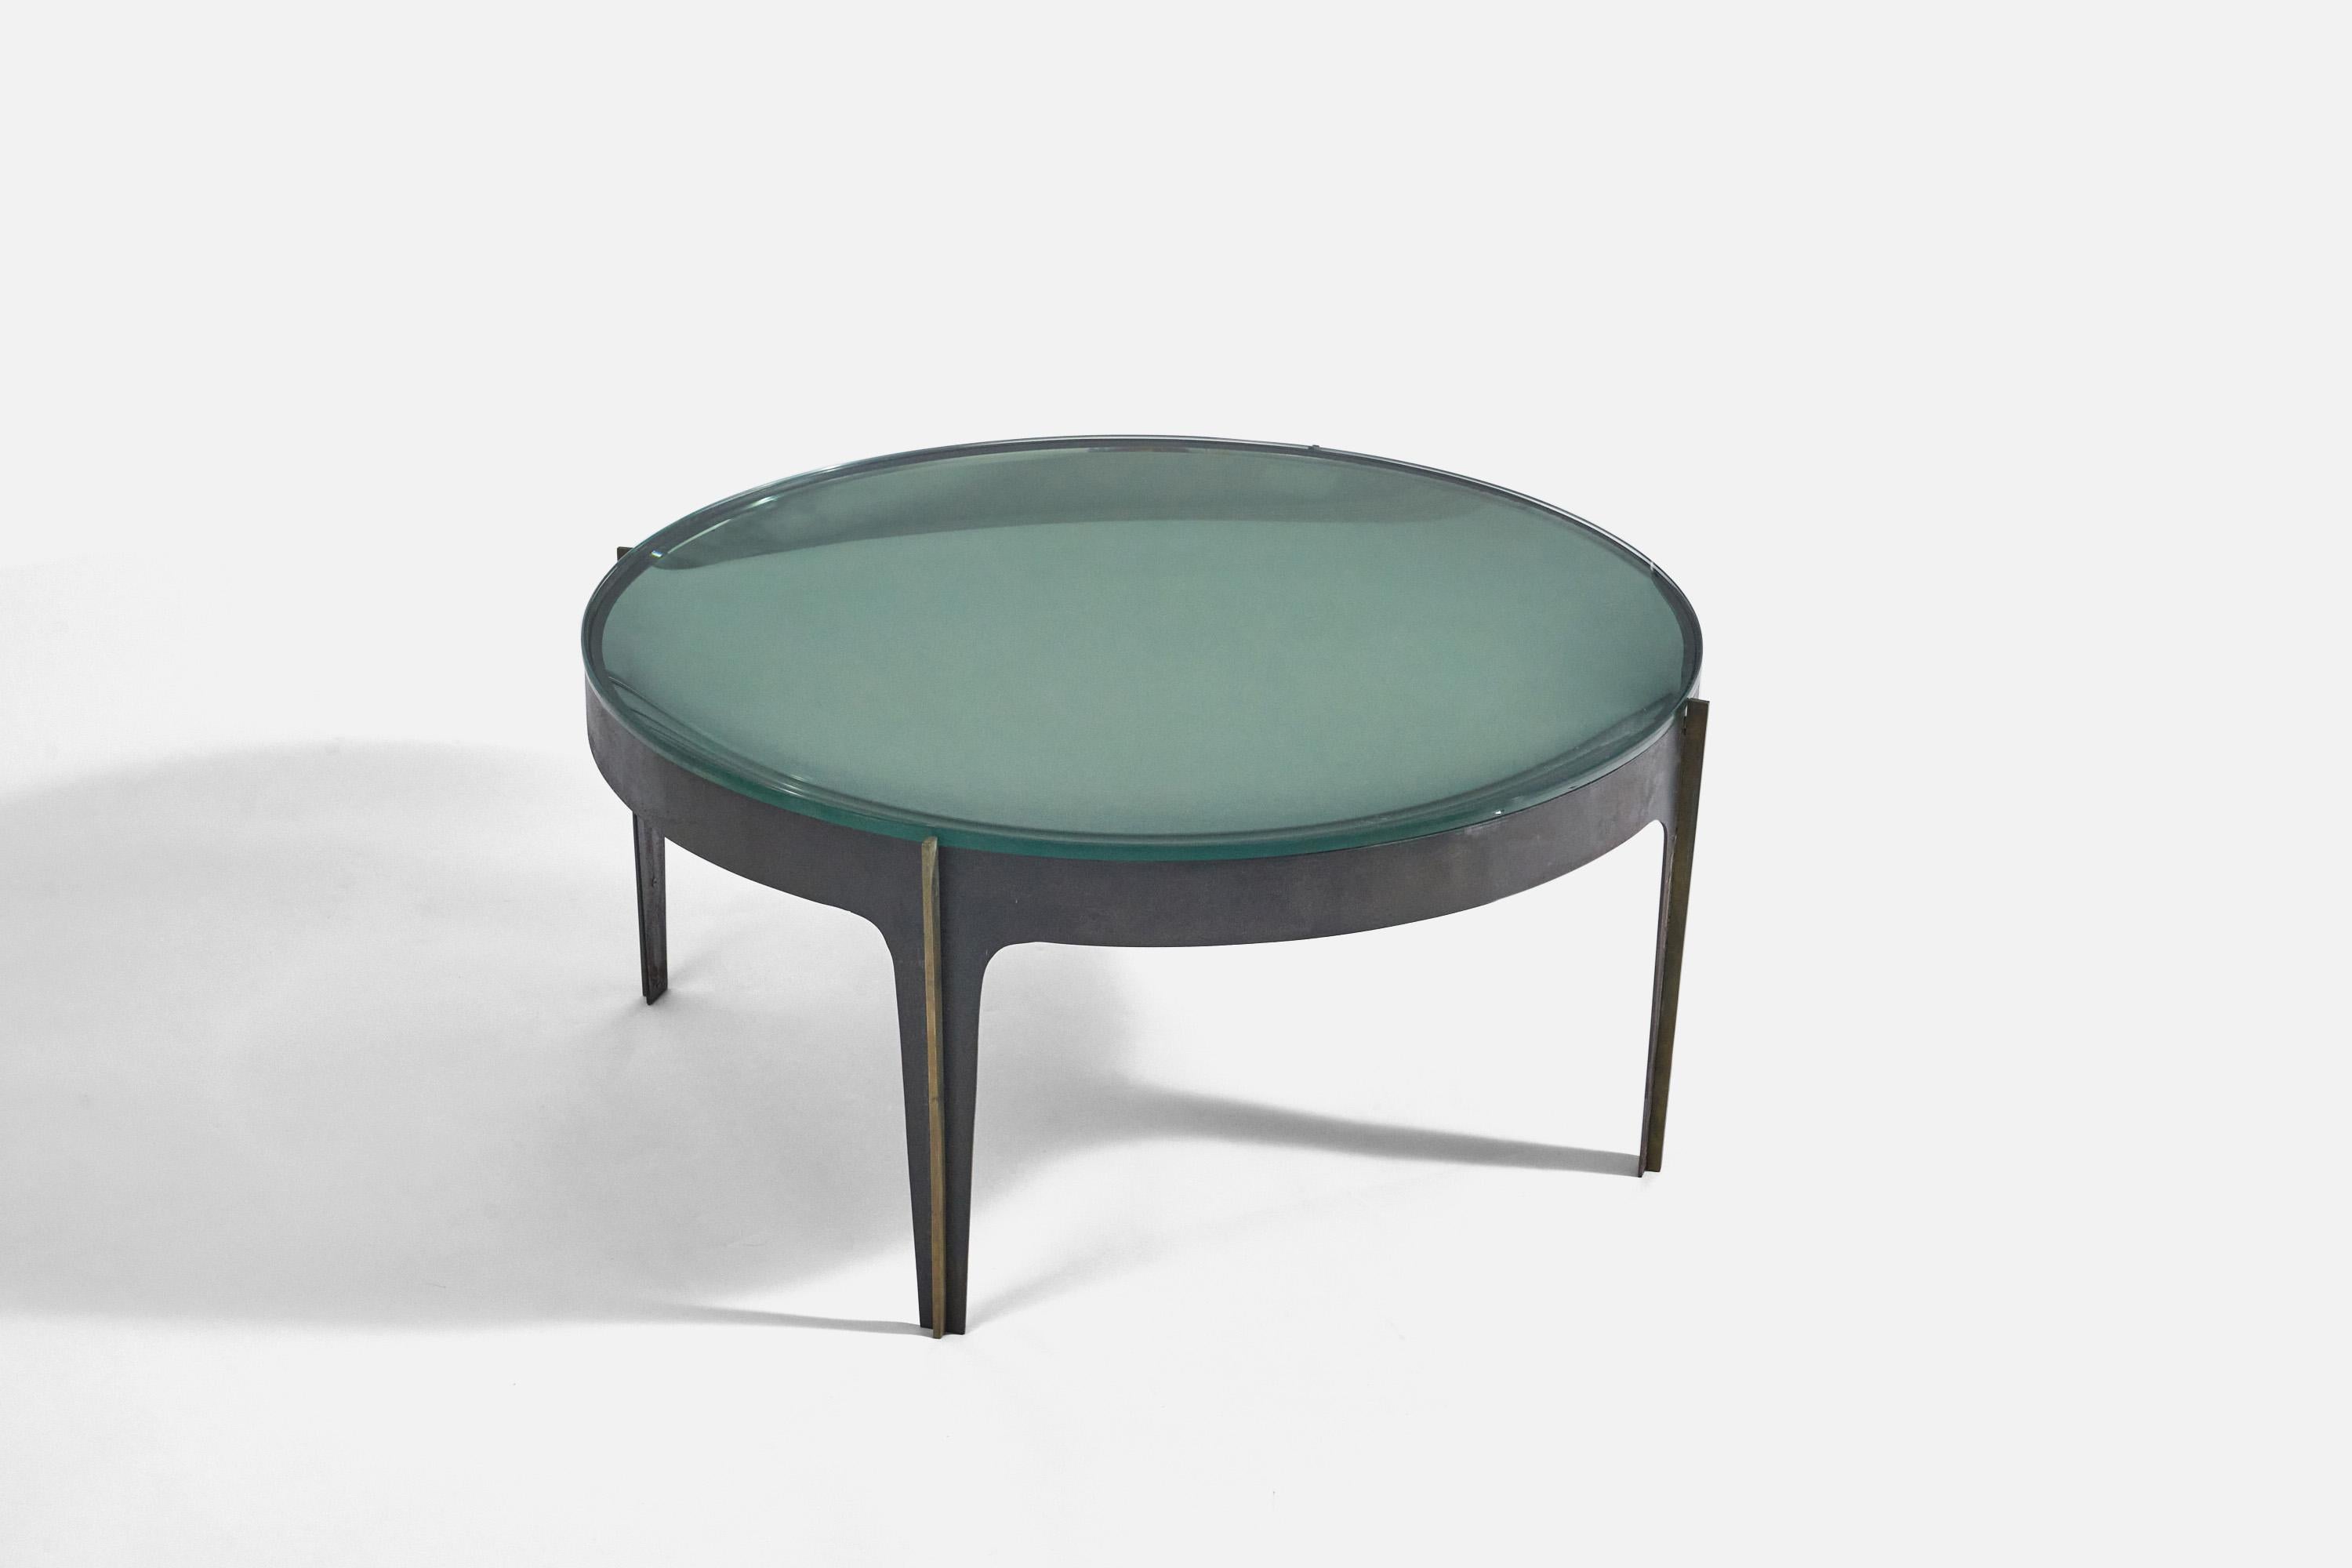 A green convex glass, metal and brass coffee table, model 1774, designed by Max Ingrand and produced by Fontana Arte, Italy, 1958.